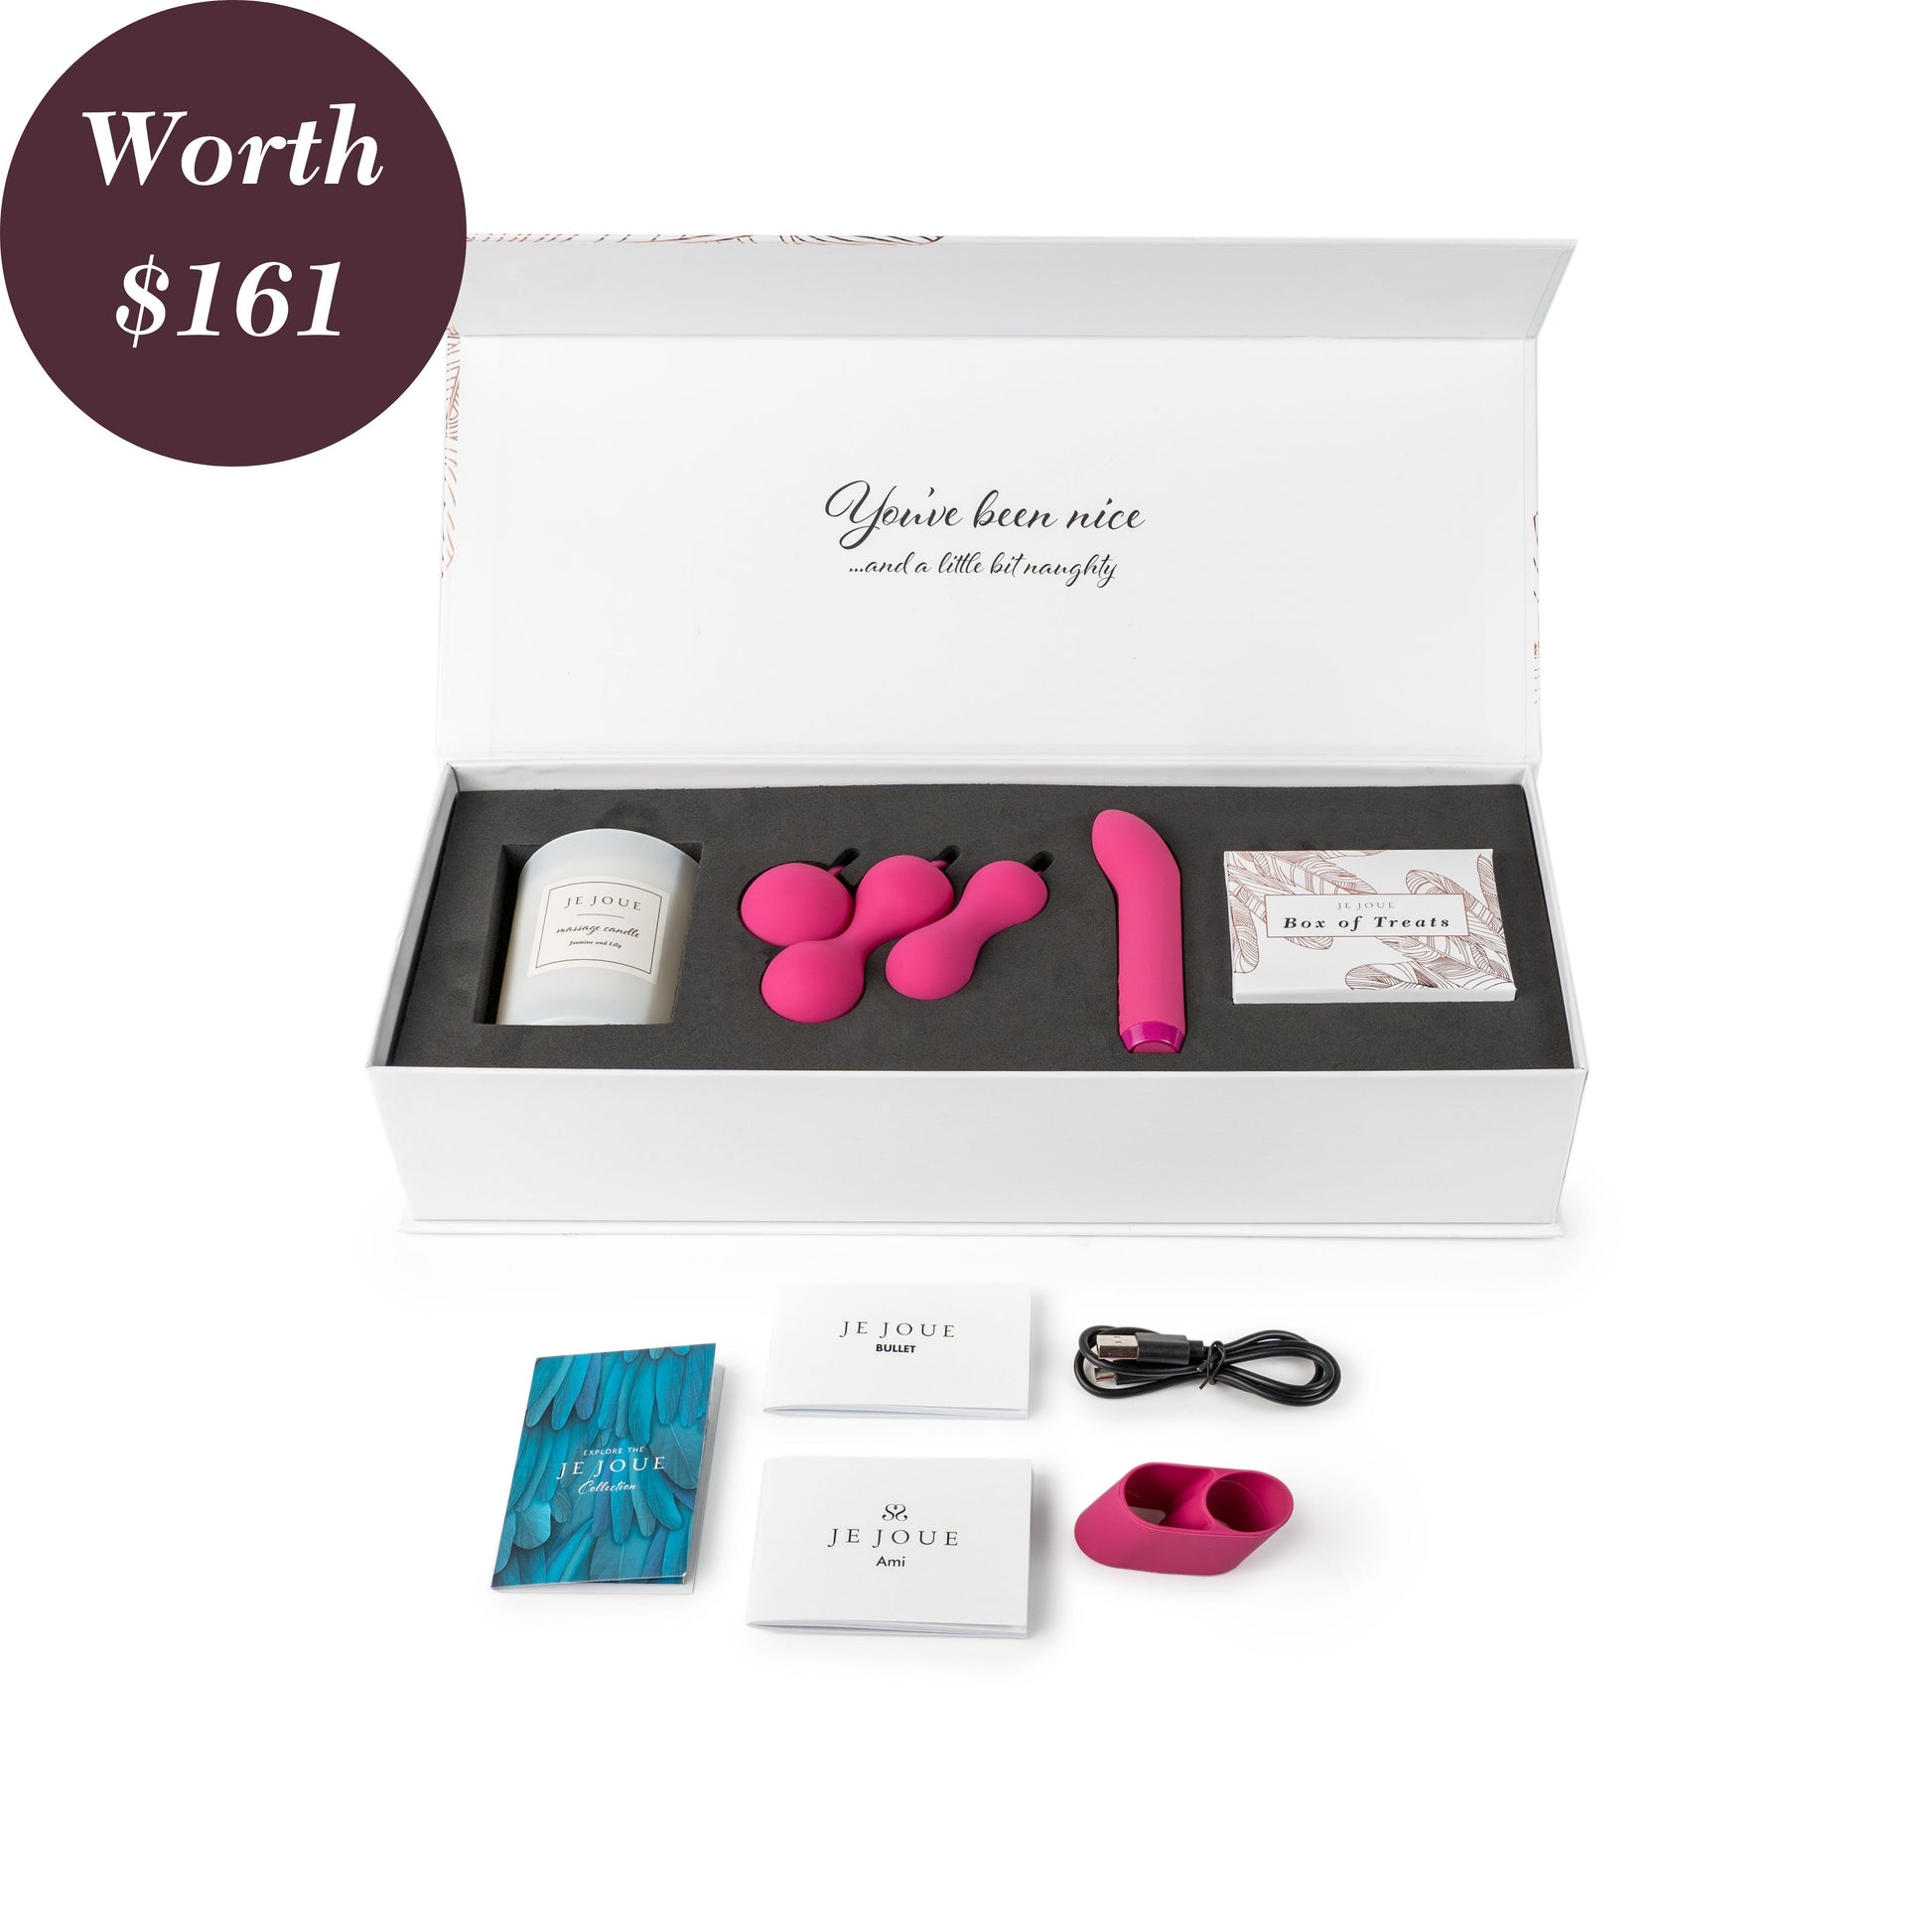 Nice Gift Set with accessories on the Side